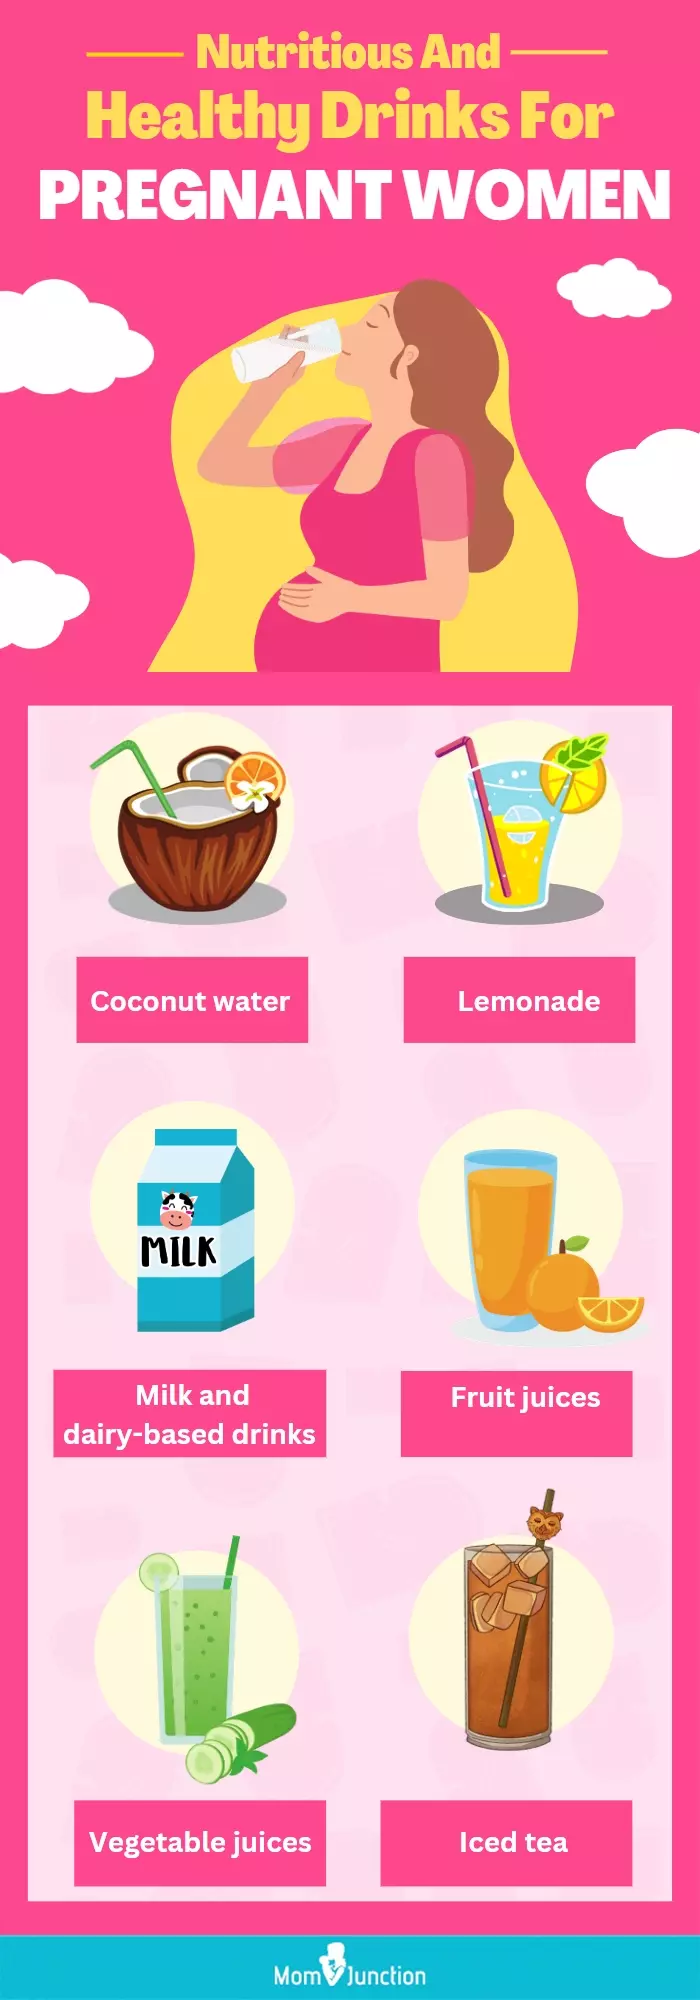 nutritious and healthy drinks for pregnant women (infographic)